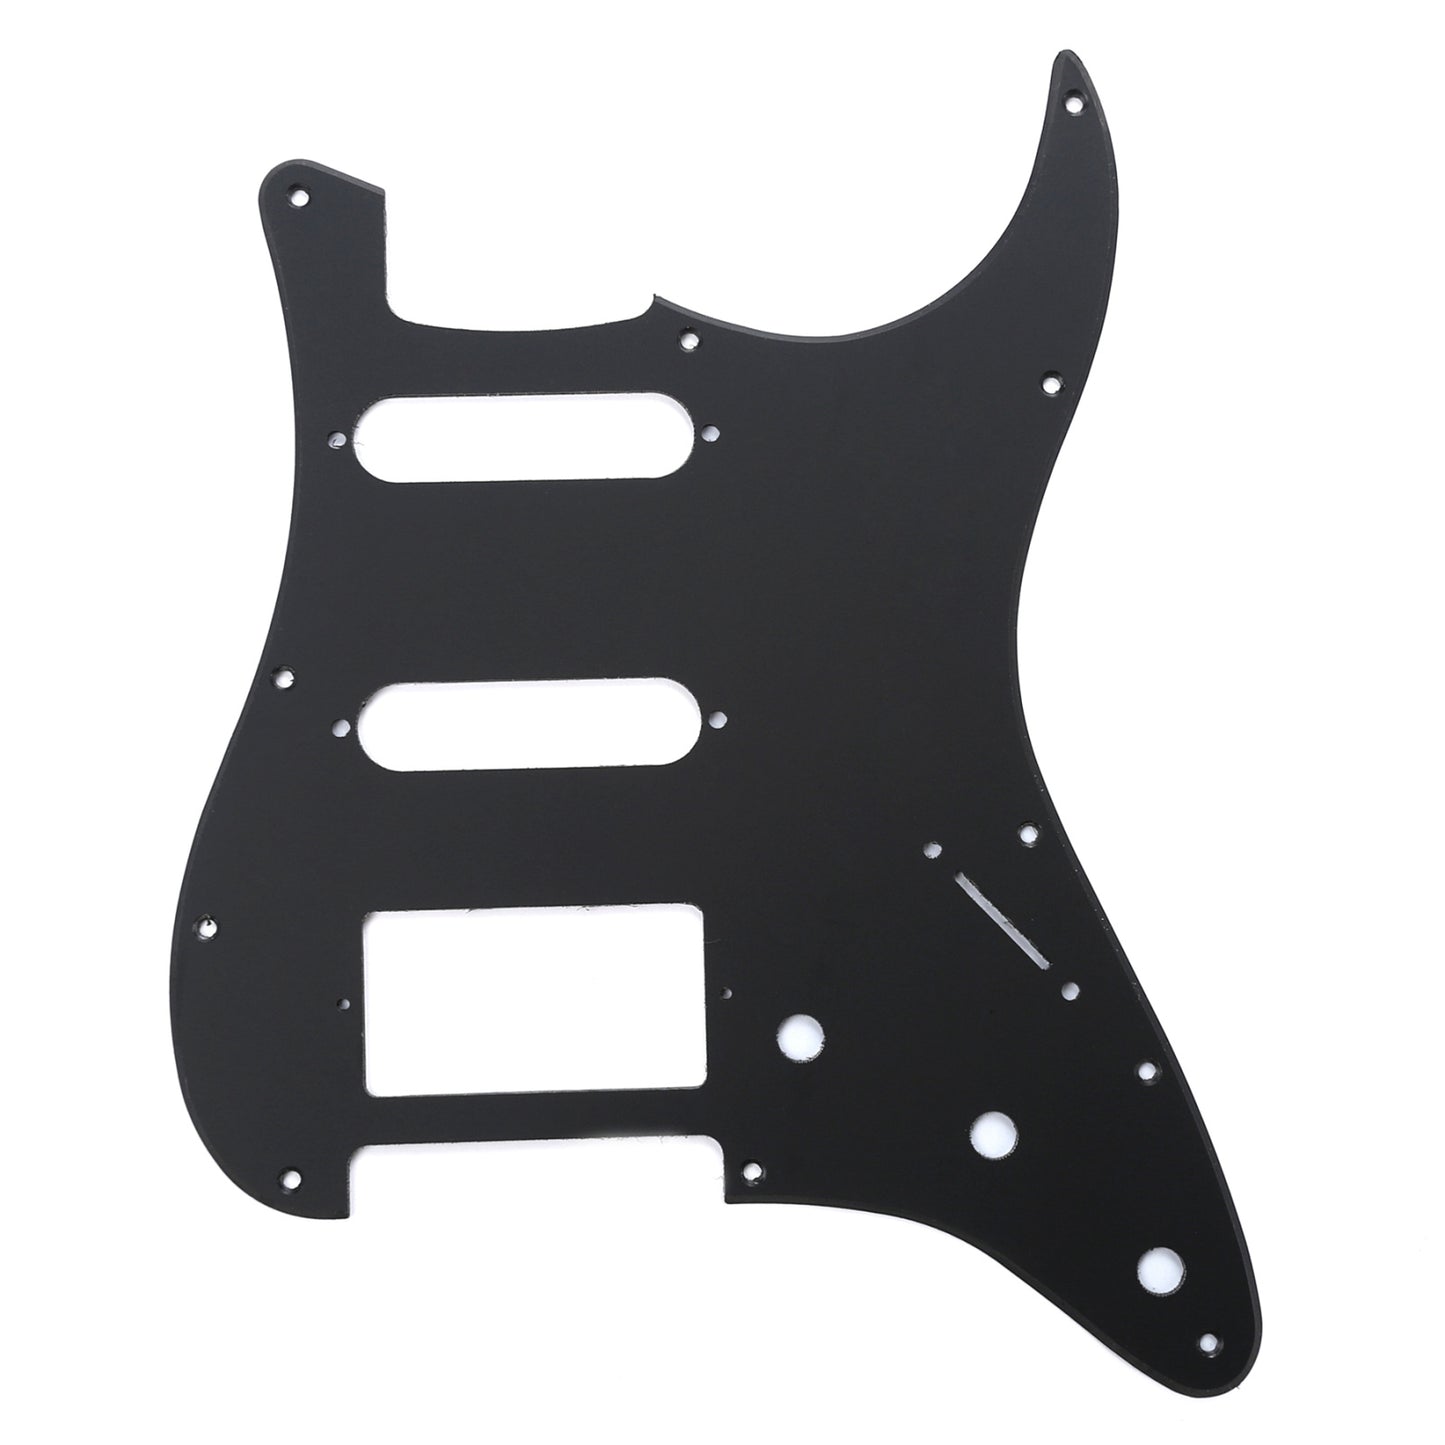 Musiclily HSS 11 Hole Guitar Strat Pickguard for Fender USA/Mexican Made Standard Stratocaster Modern Style,1Ply Matte Black